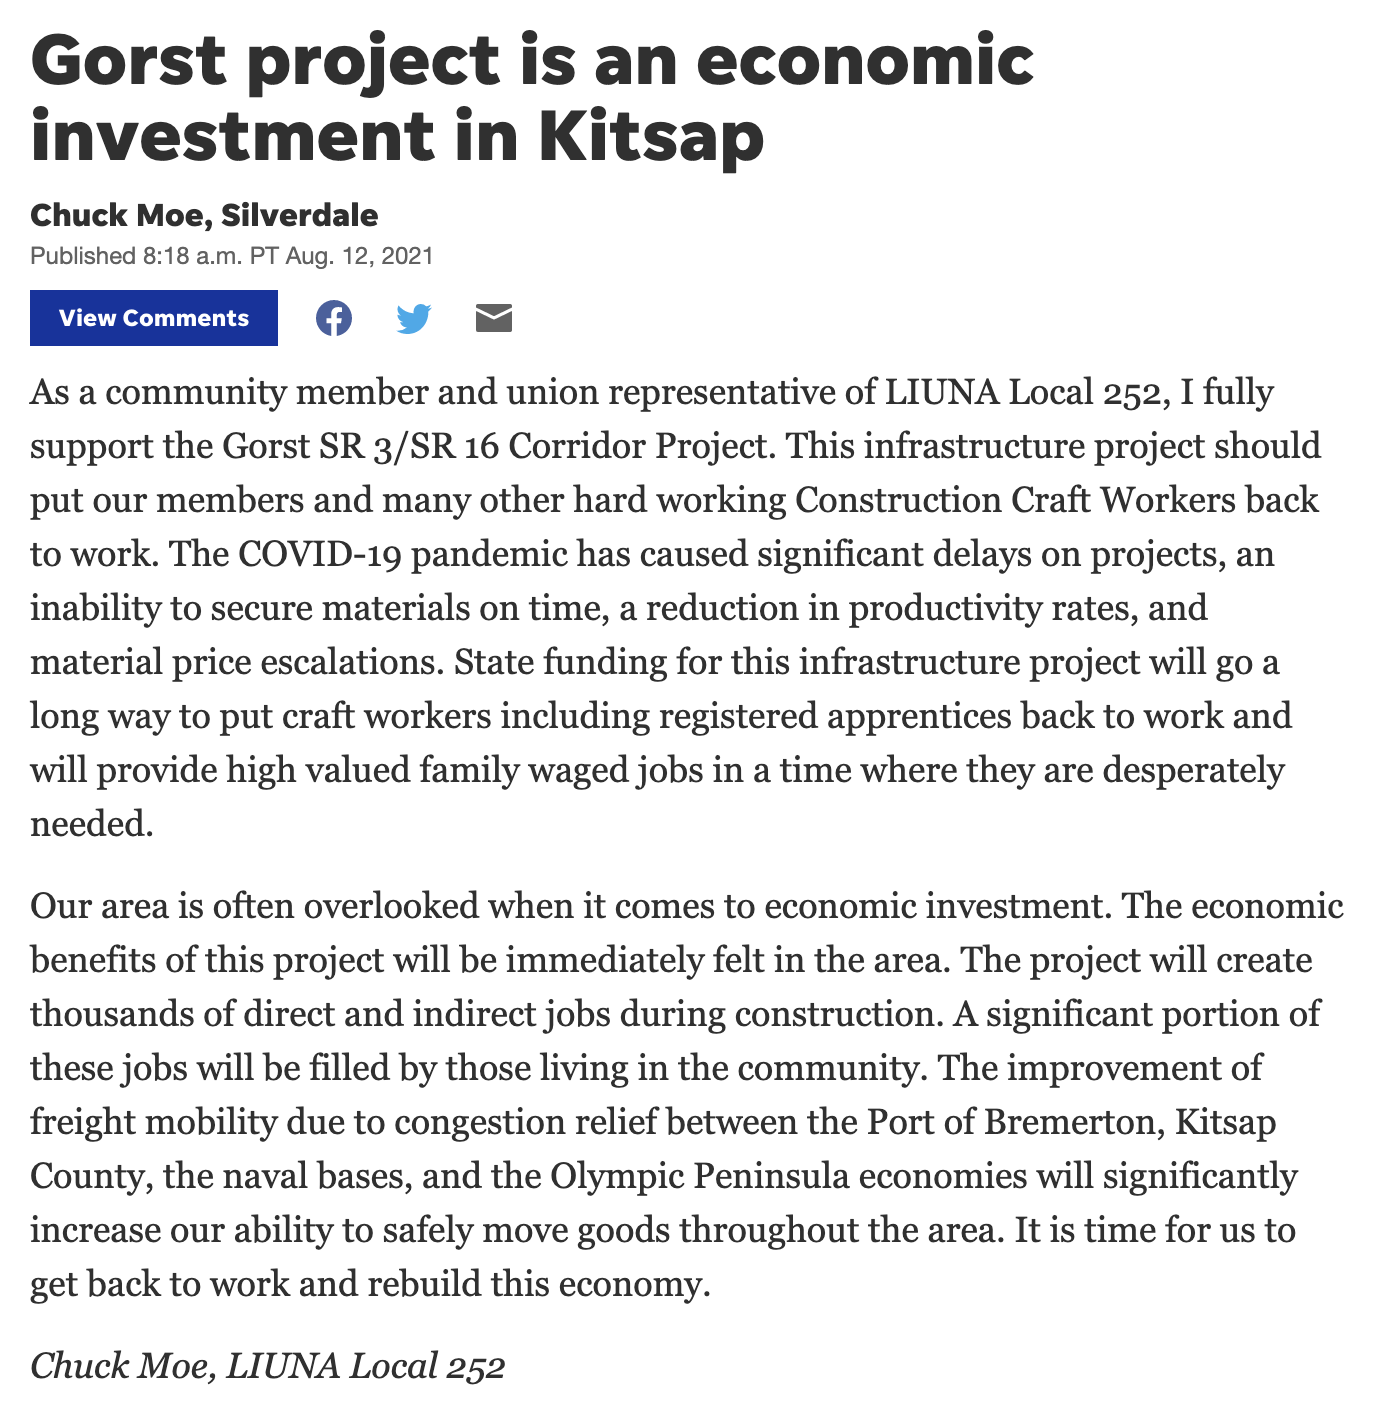 Kitsap Sun - "Gorst project is an economic investment in Kitsap"